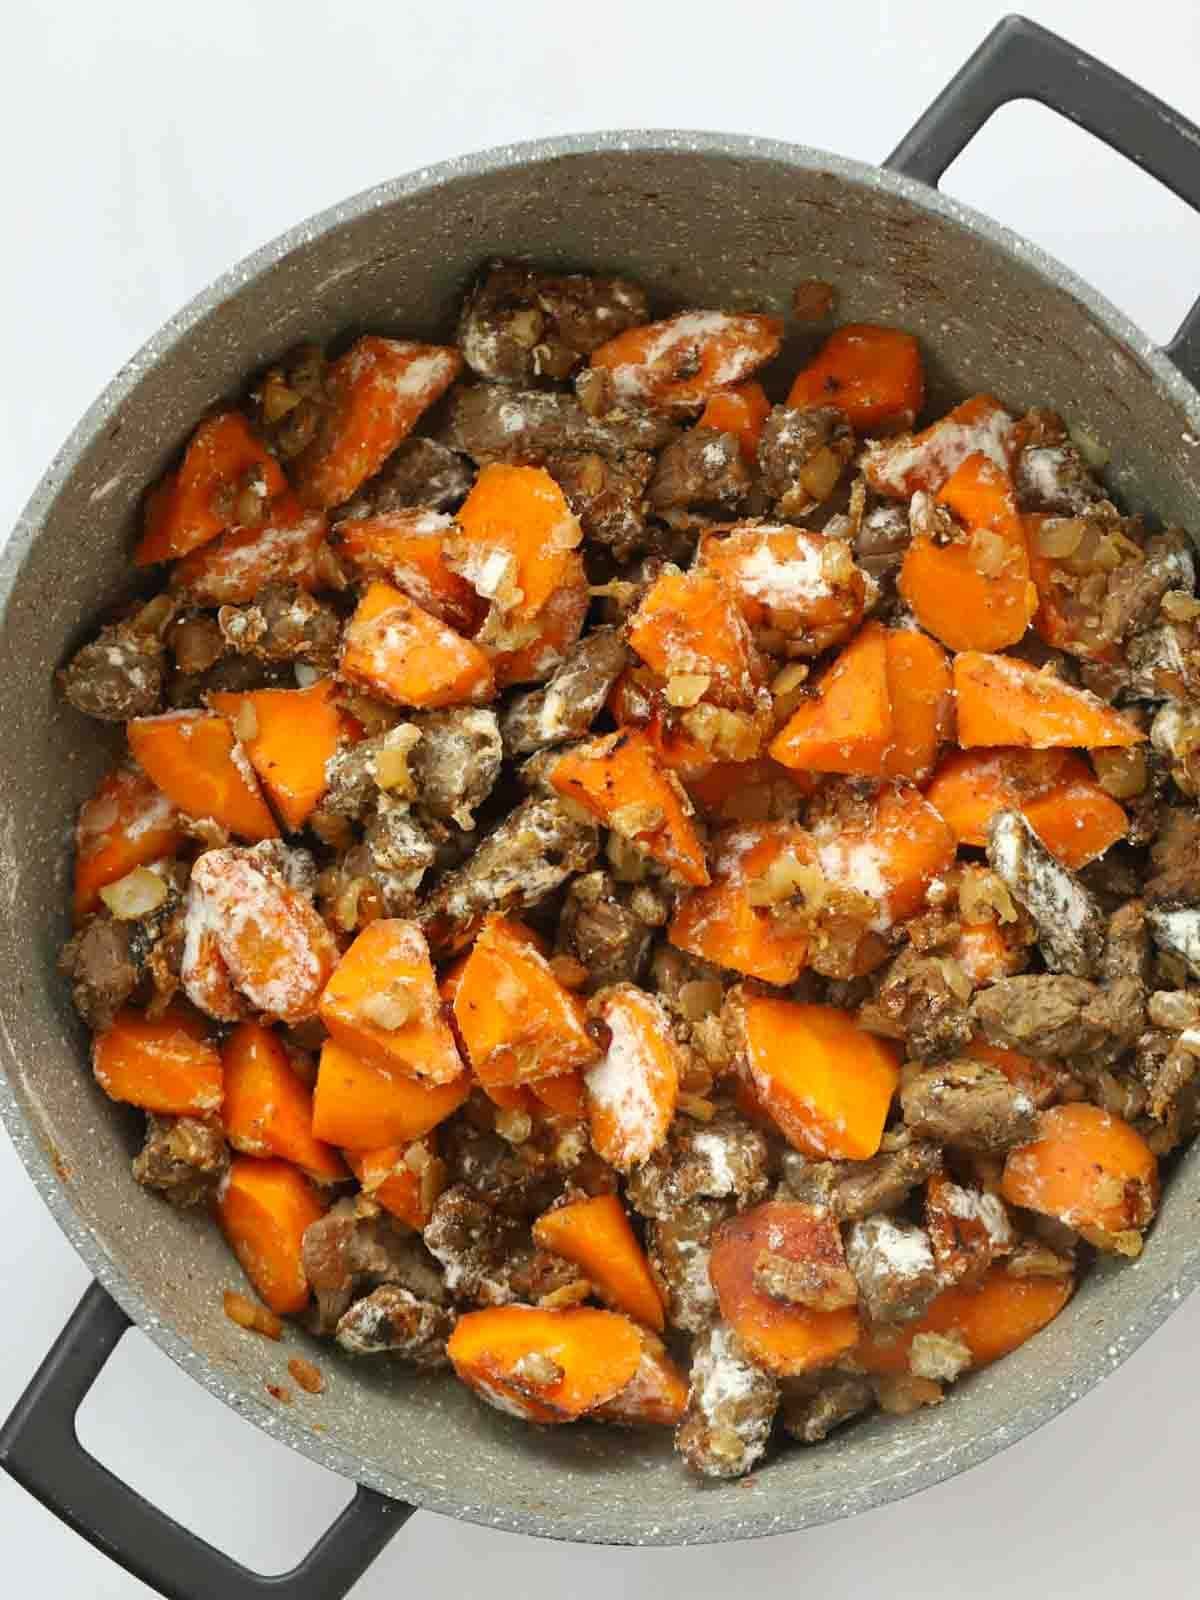 Cooked beef, carrots, onion and flour in a large pan for step 2 of the recipe for Steak Pie.